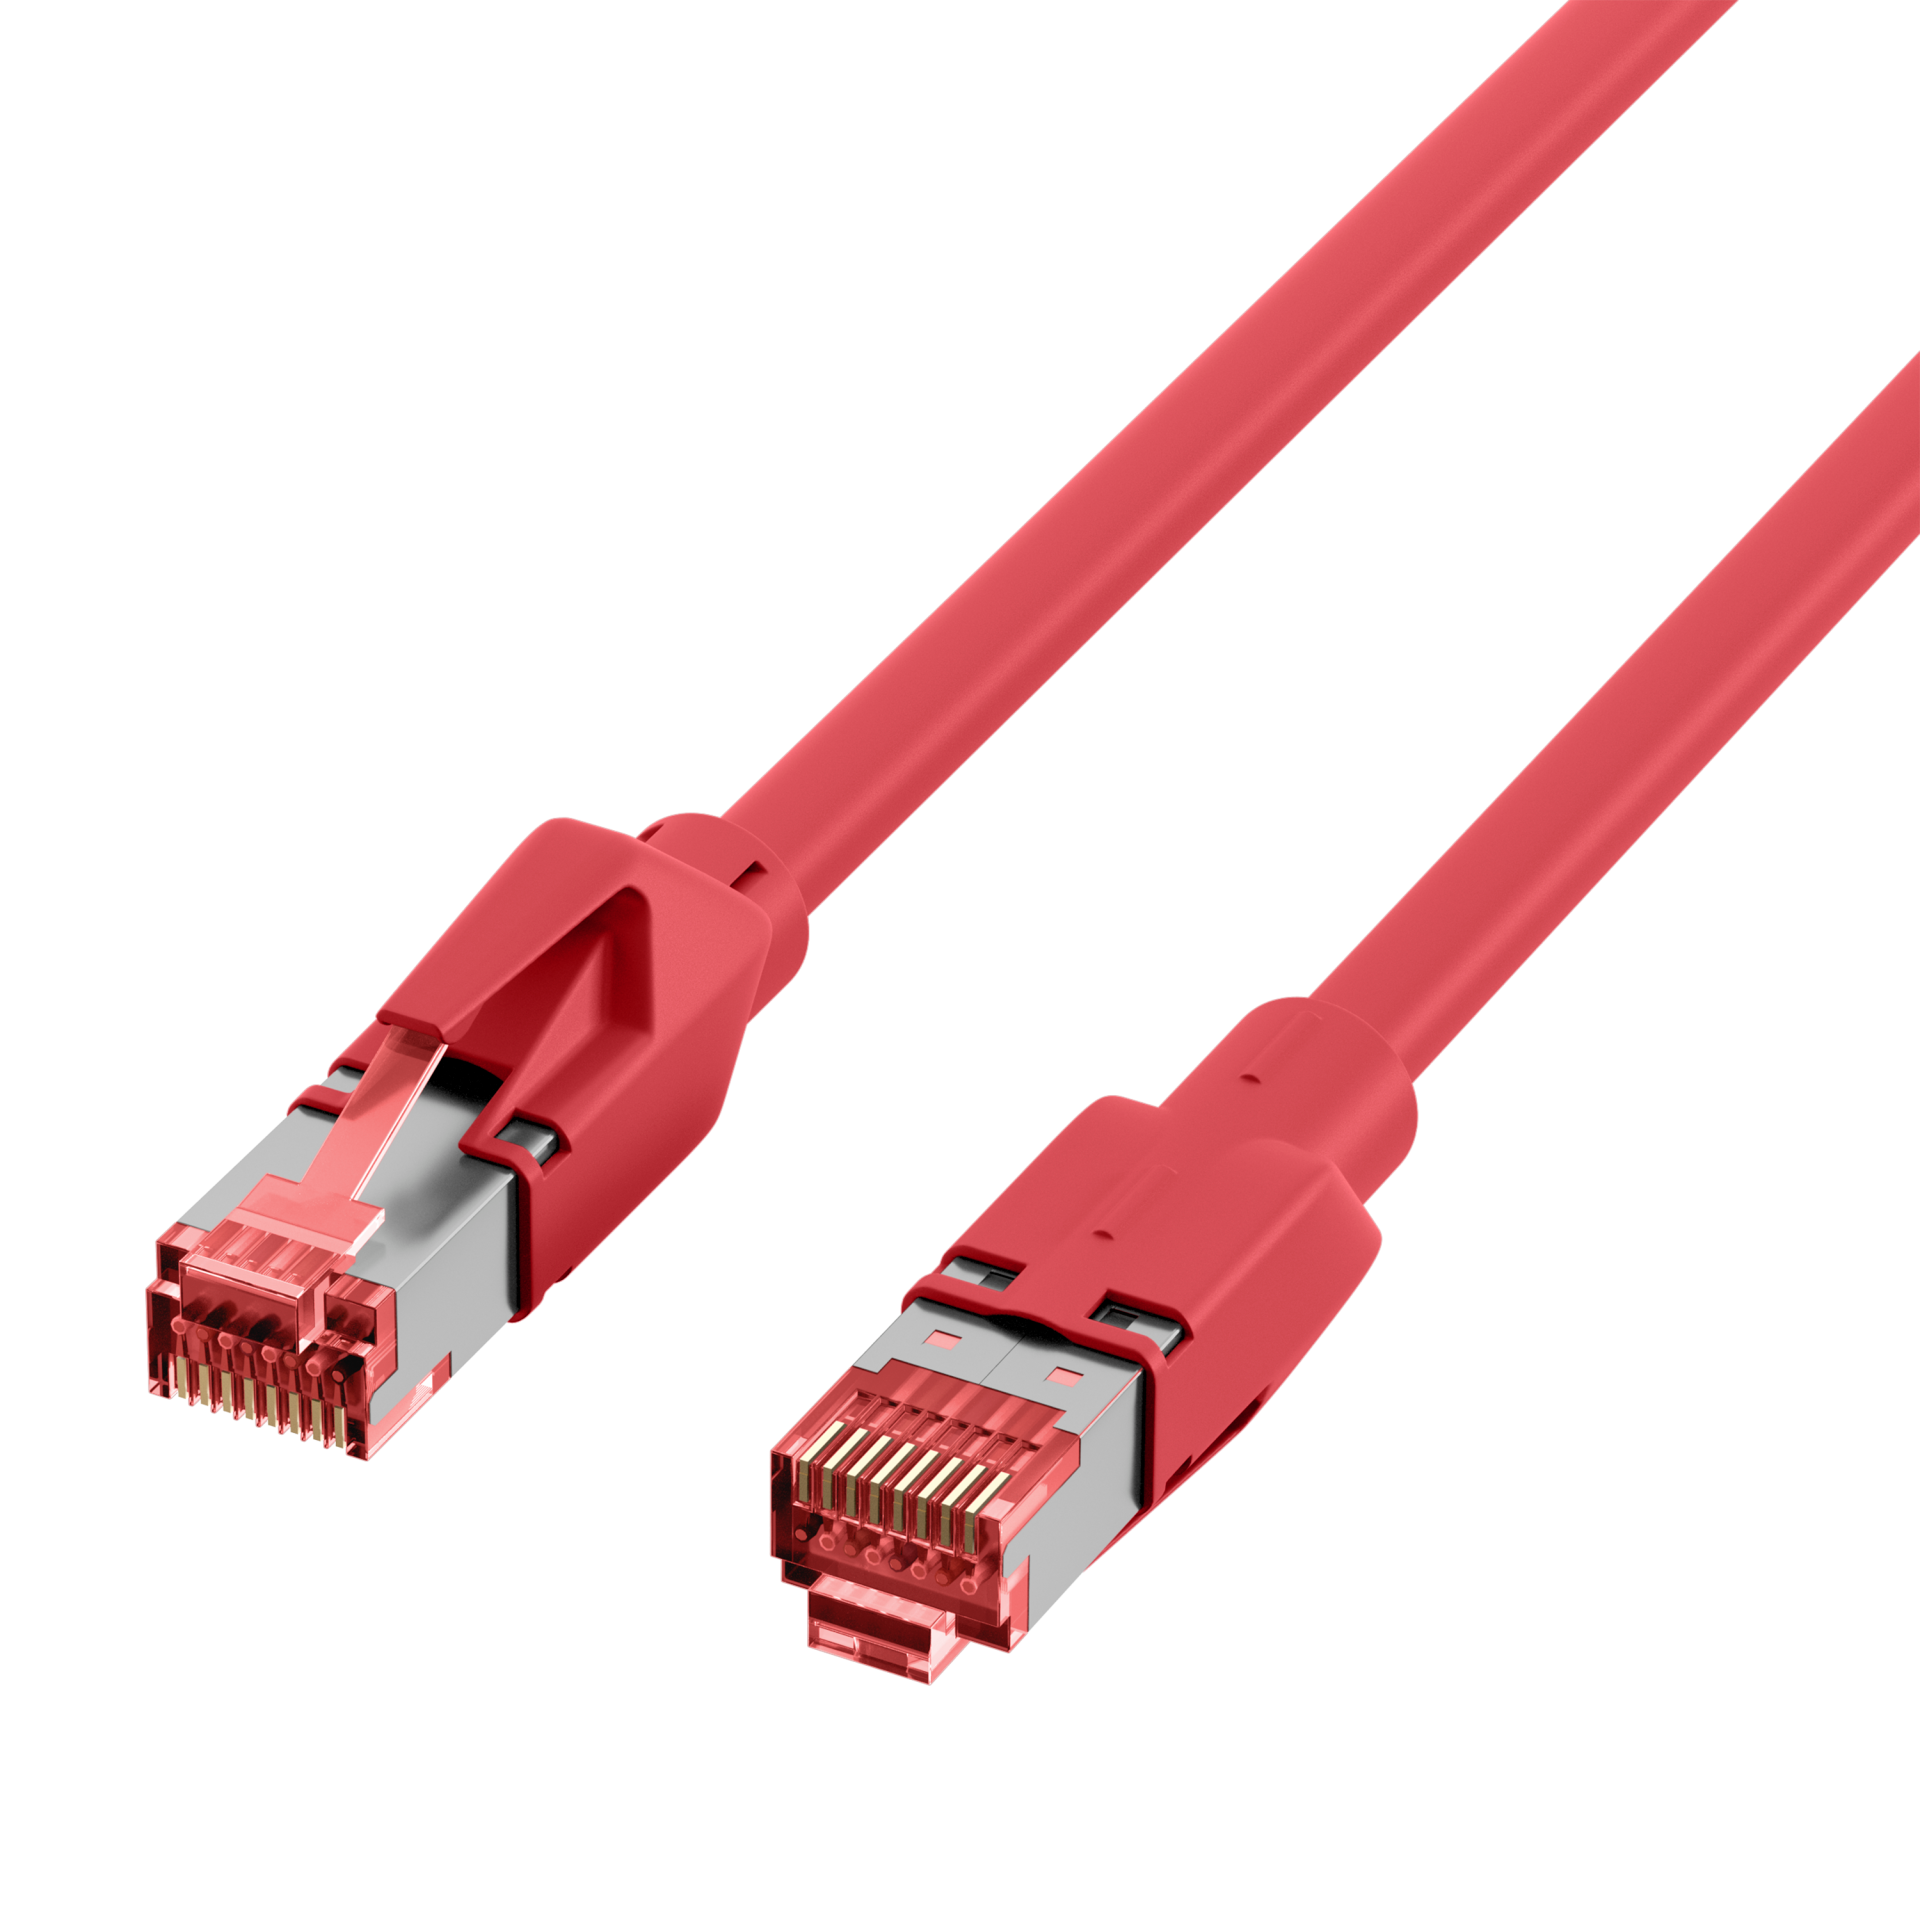 RJ45 Patch Cord Cat.6A S/FTP Dätwyler 7702 TM21 red 7,5m